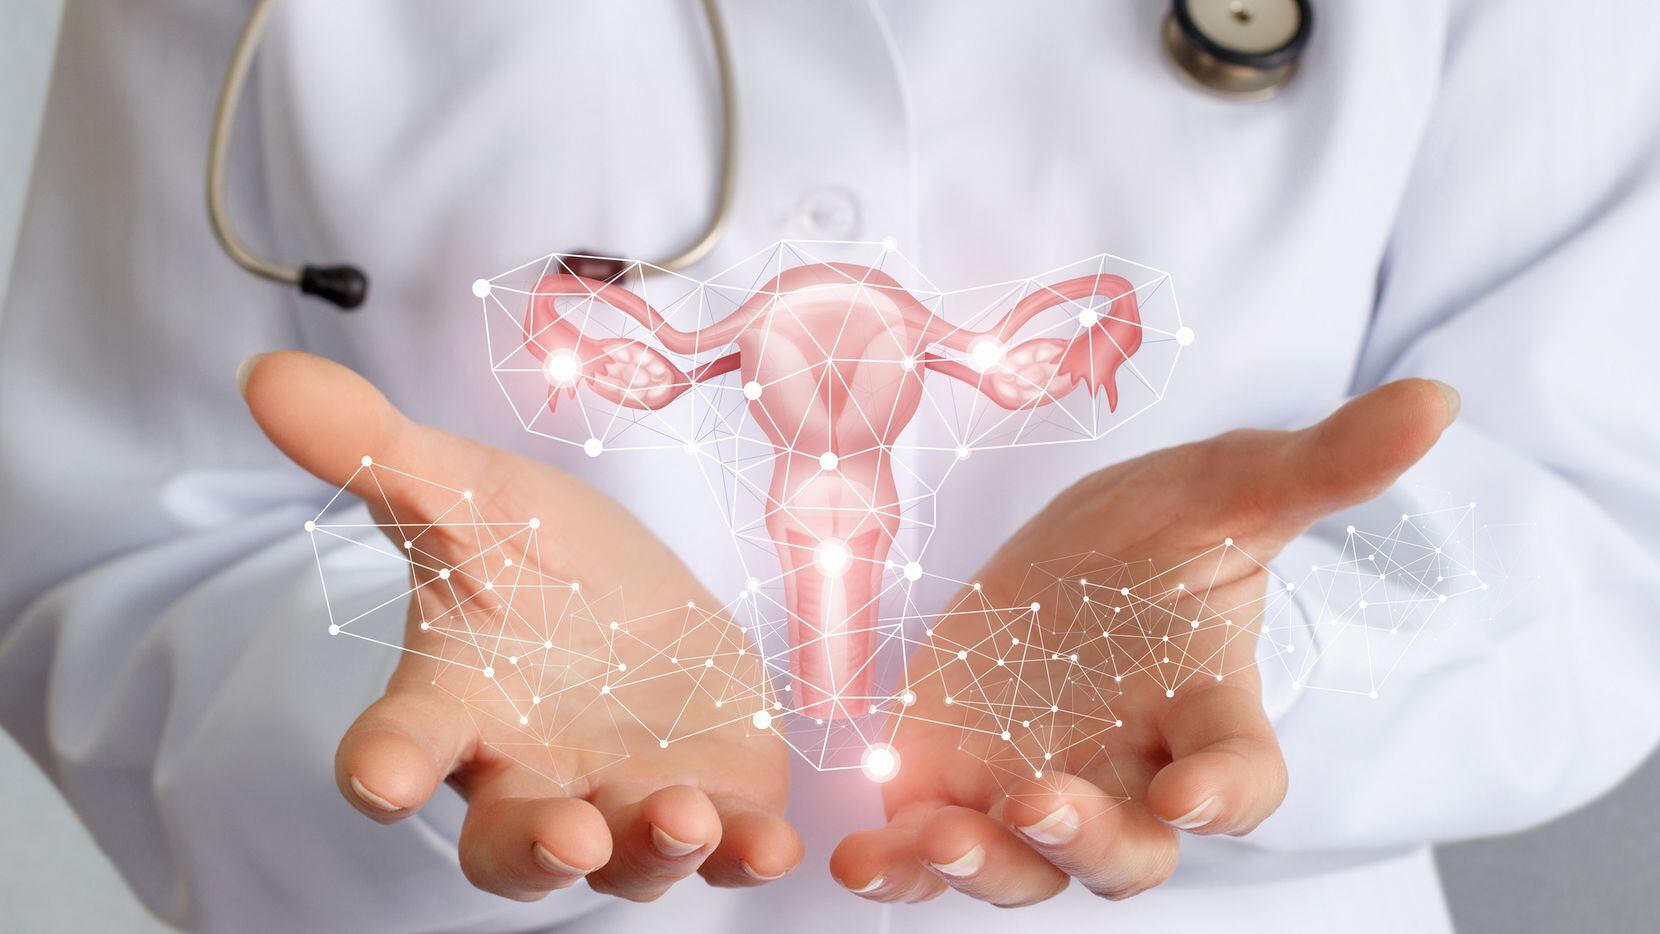 Fertility awareness-based methods can be very helpful in detecting underlying issues like...